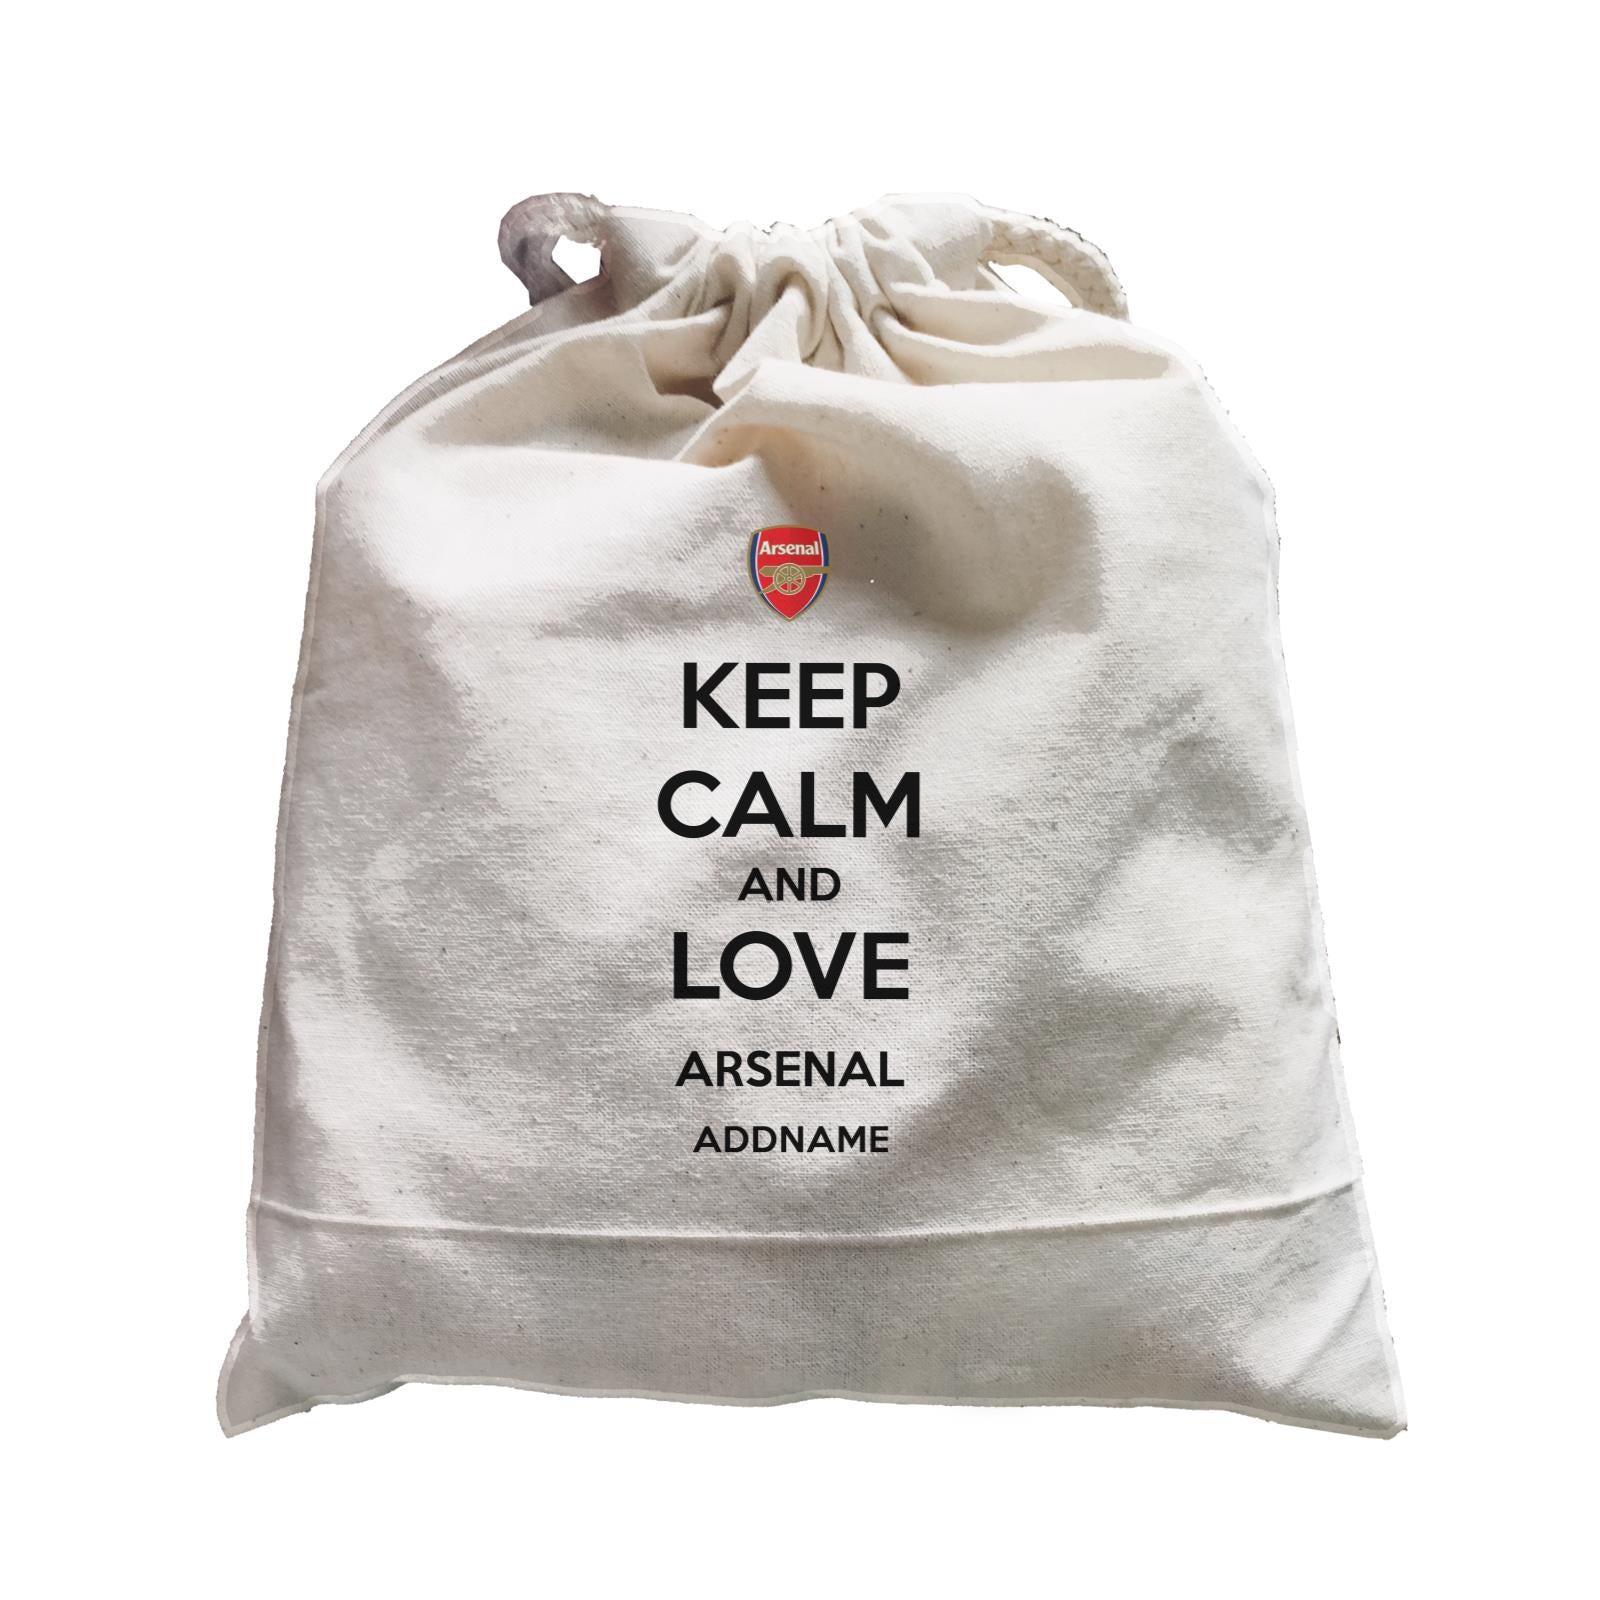 Arsenal Football Keep Calm And Love Series Addname Satchel